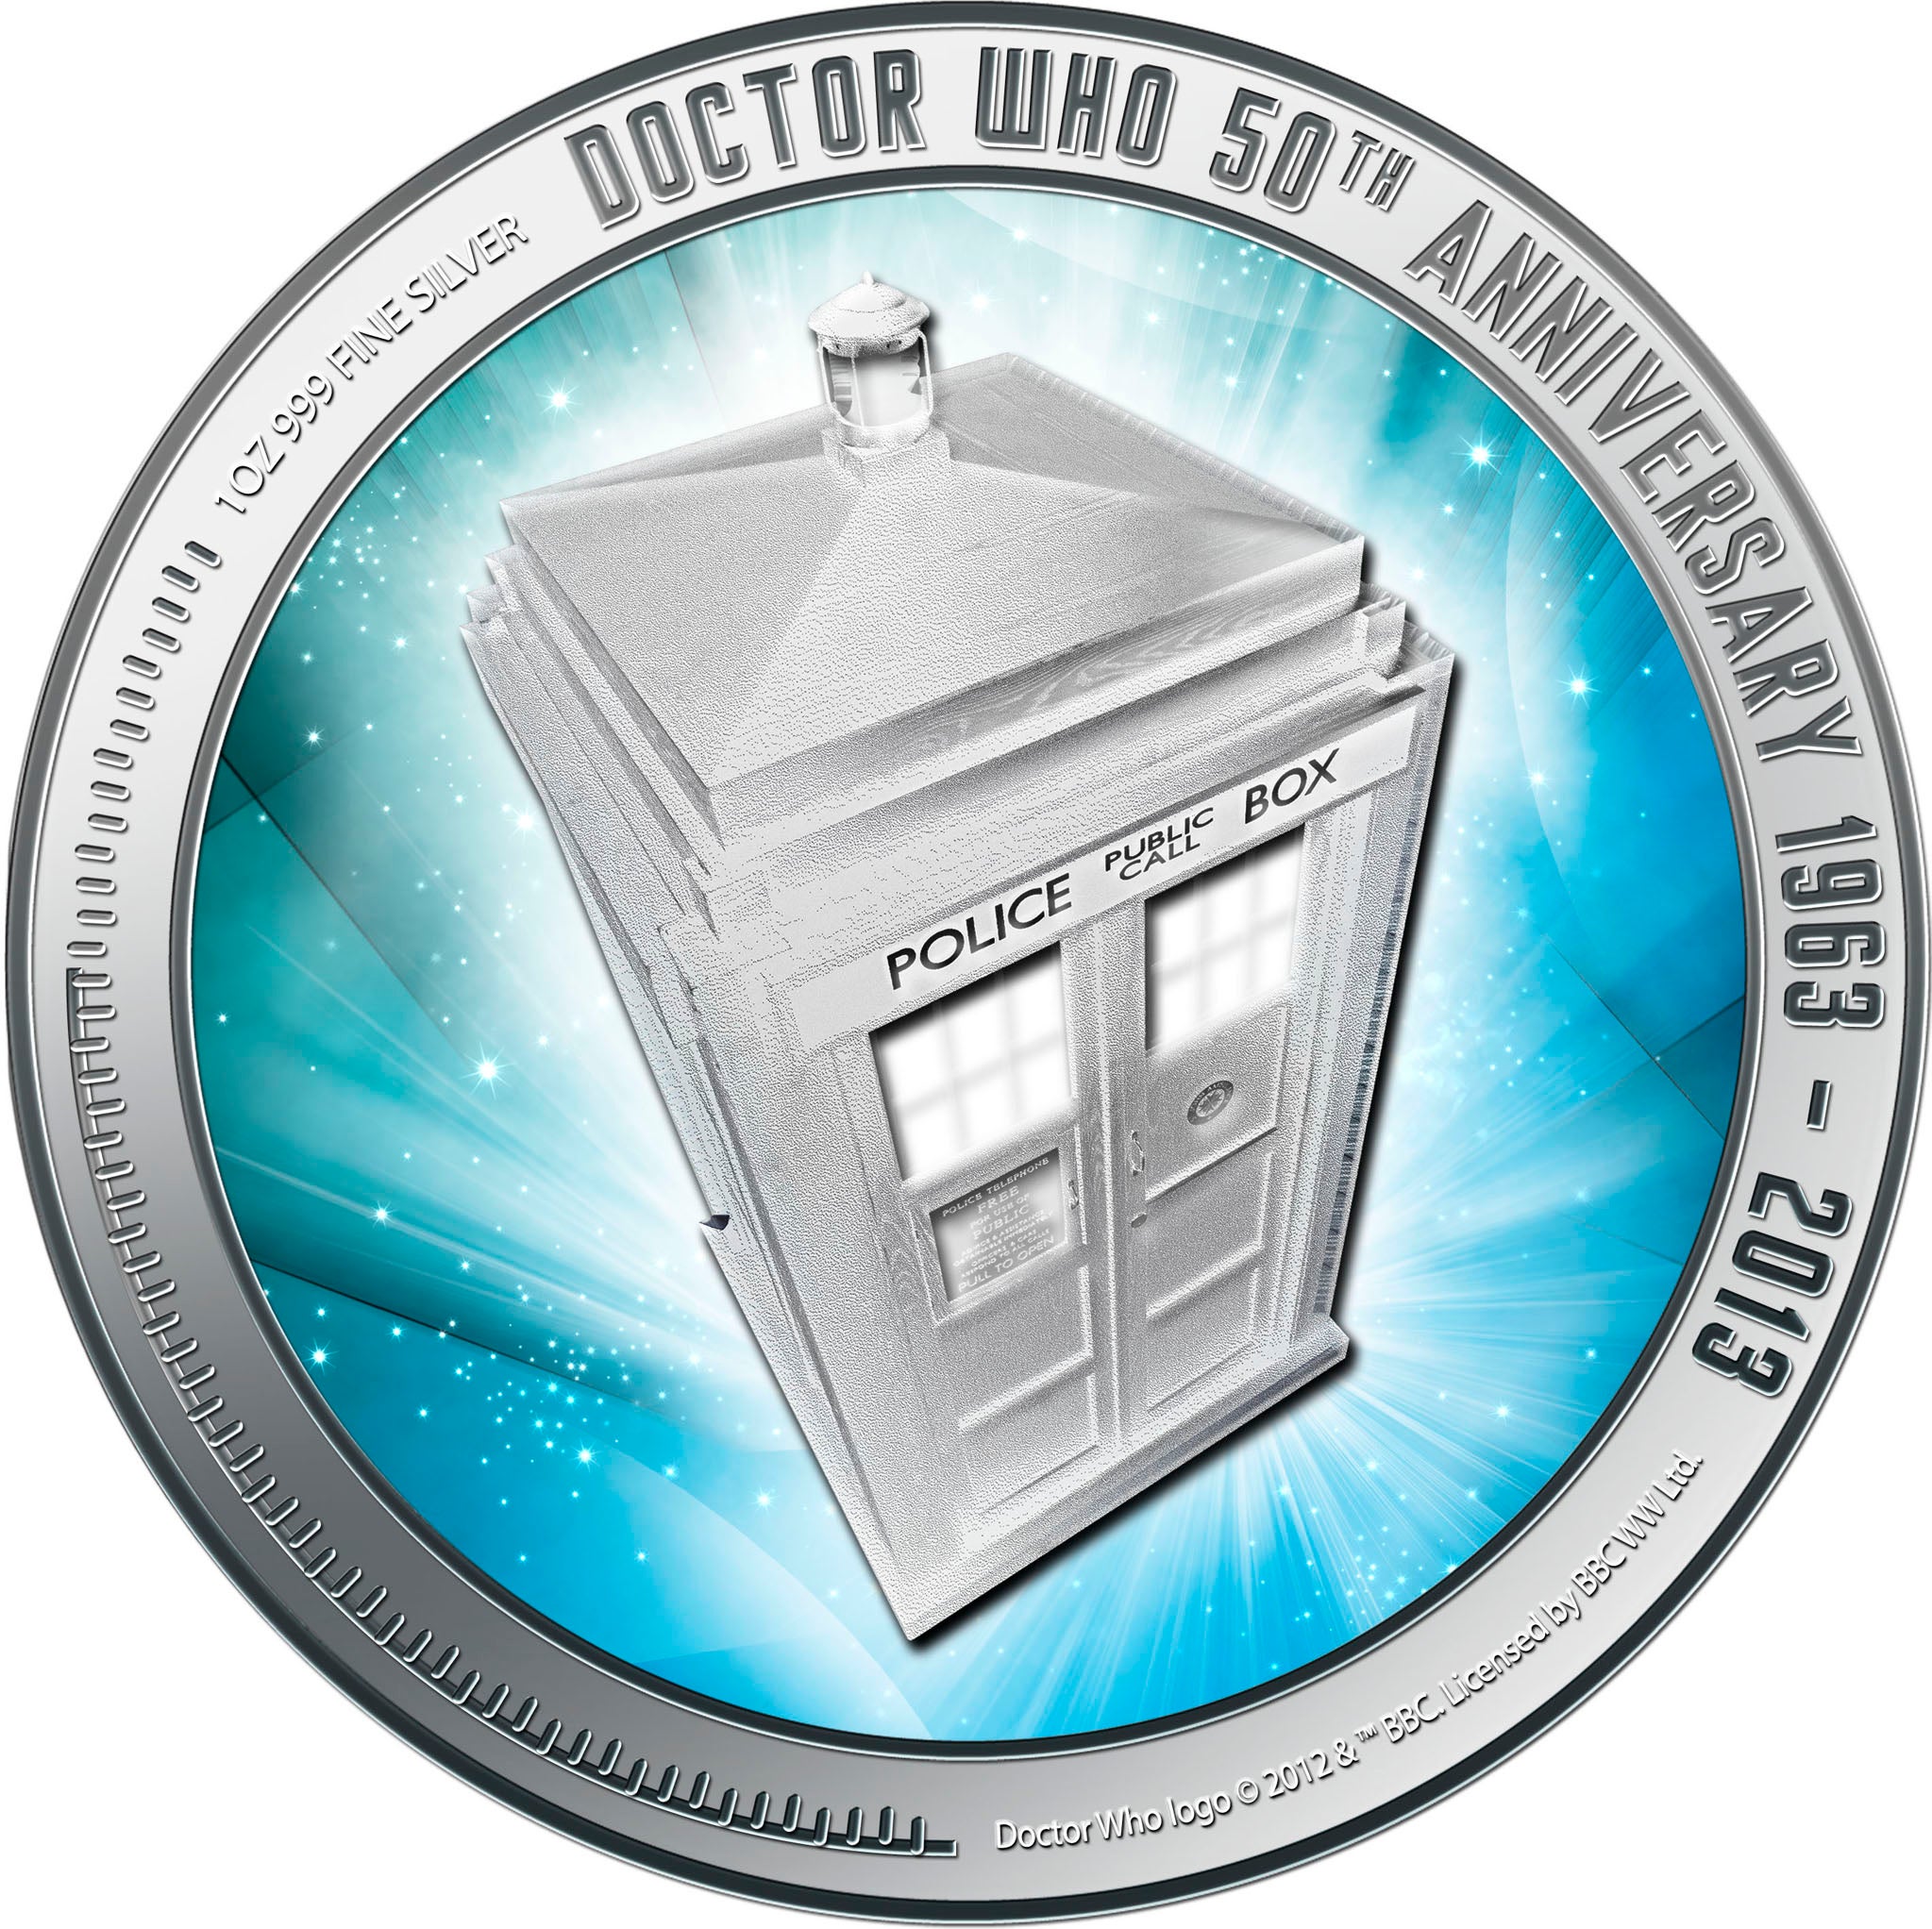 Doctor Who 50th birthday coin